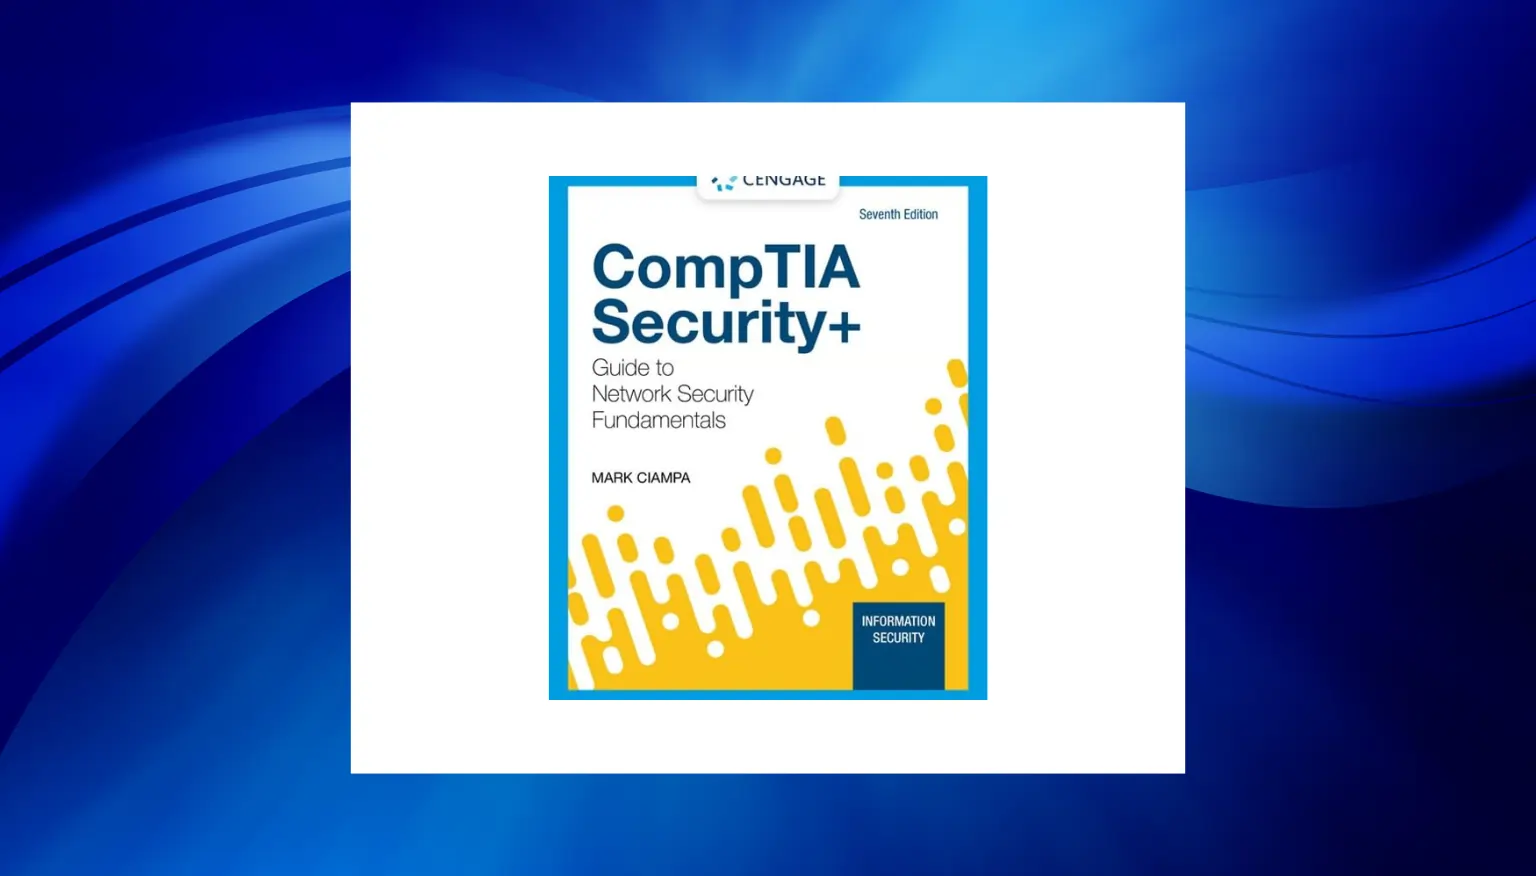 best books on network security - CompTIA Security+ Guide to Network Security Fundamentals